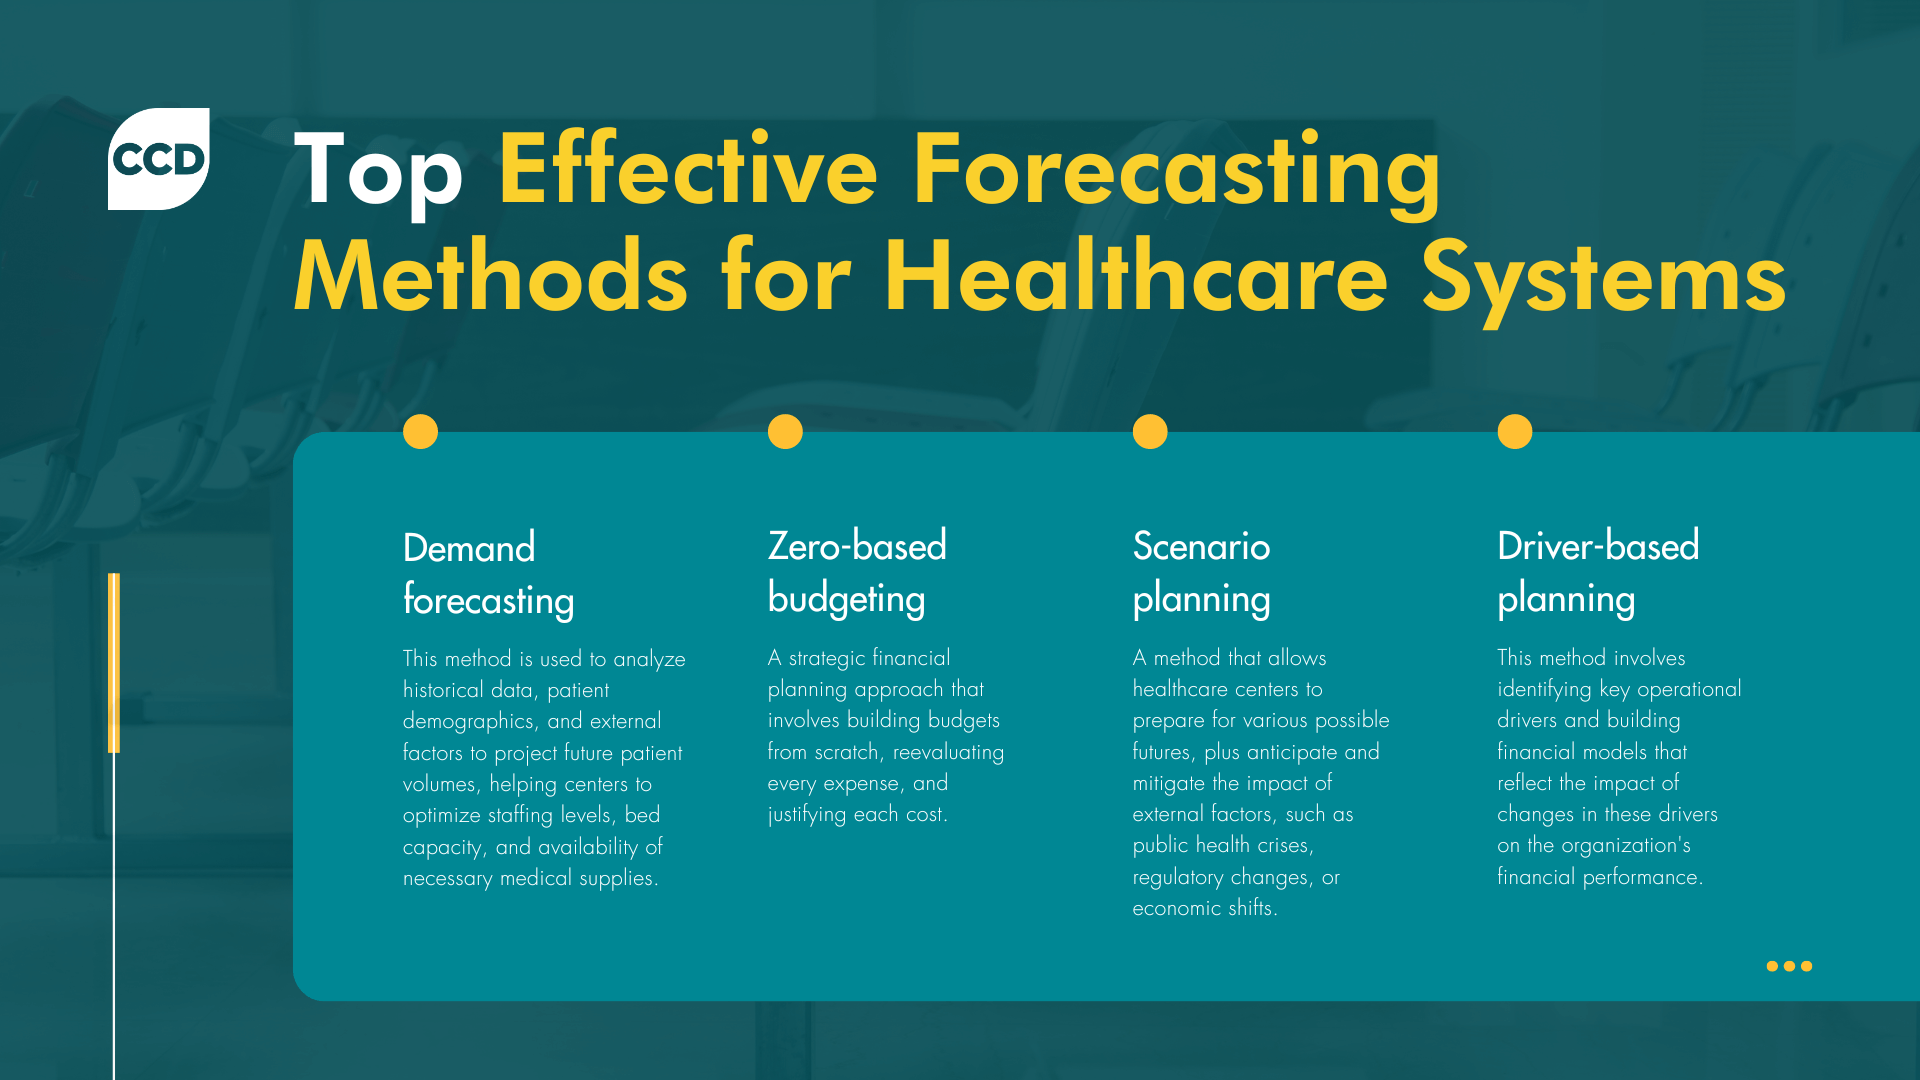 Top forecasting methods used in Healthcare